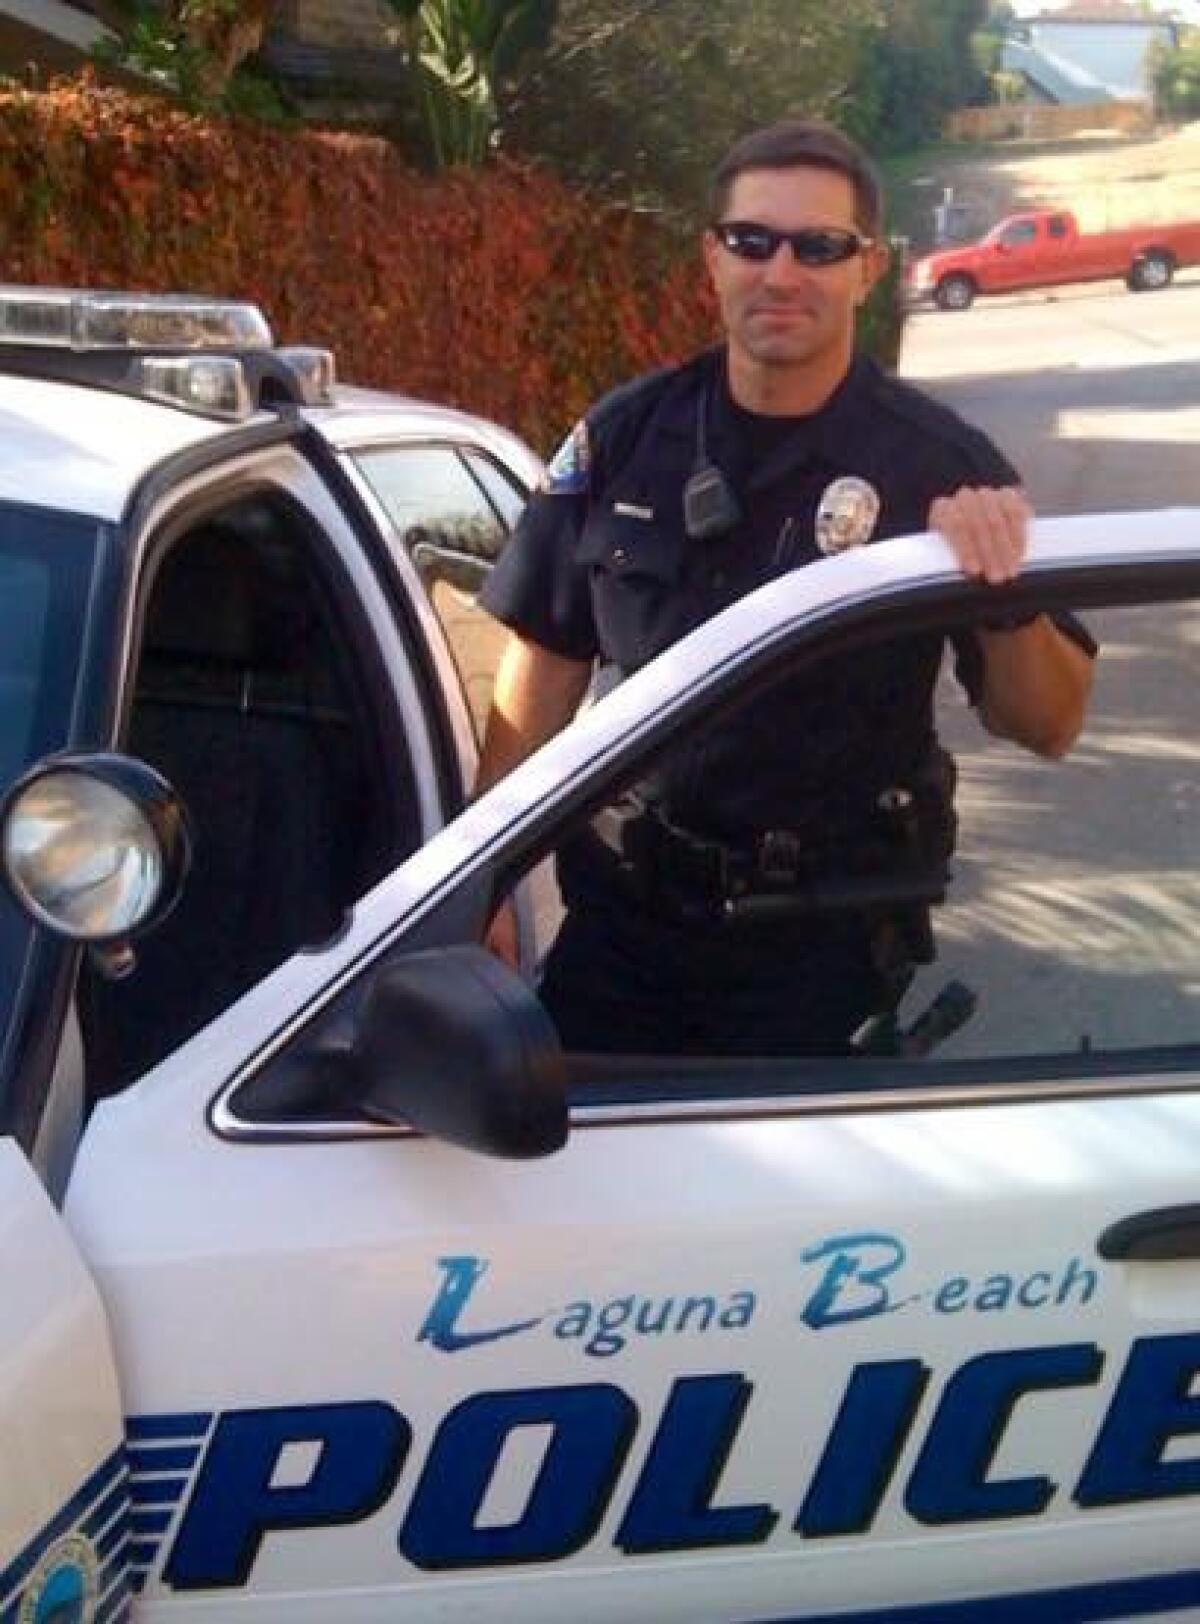 Jon Coutchie, pictured, lost his life in the line of duty for the Laguna Beach police department on Sept. 21, 2013.